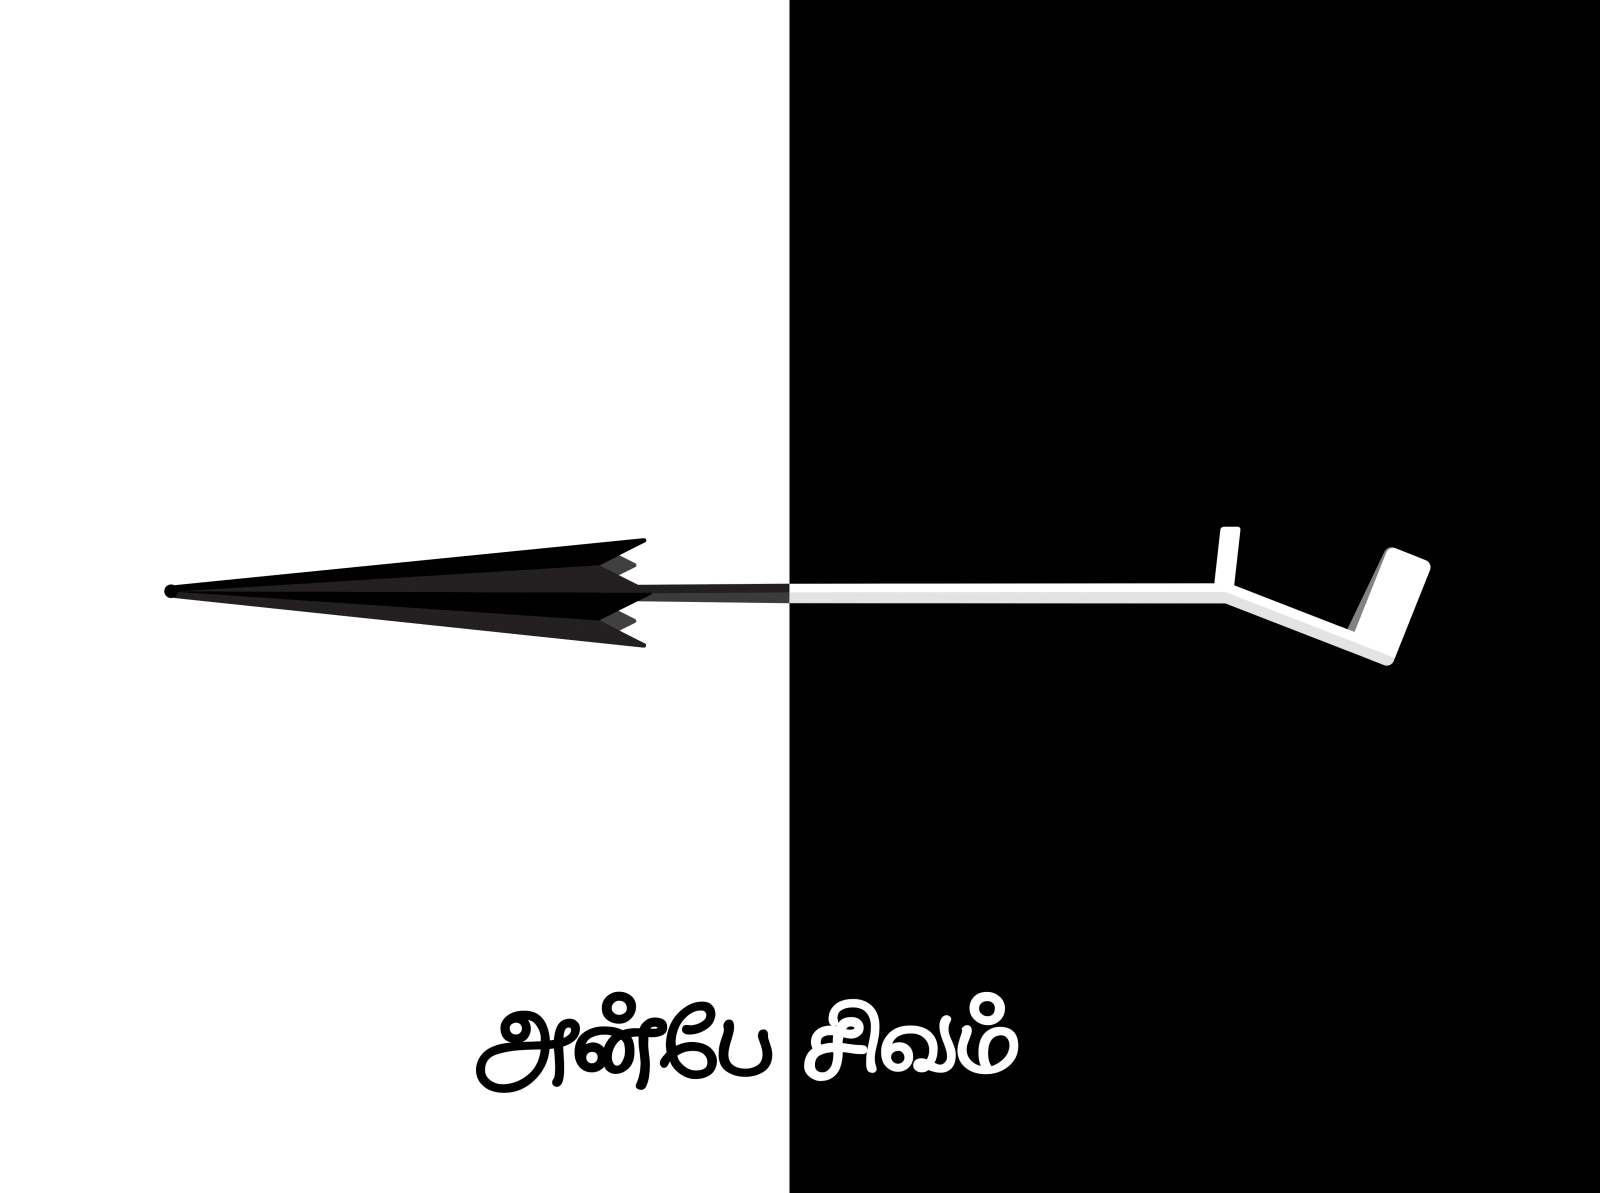 Anbe Sivam - Movie - Minimal Poster by Gopinath on Dribbble